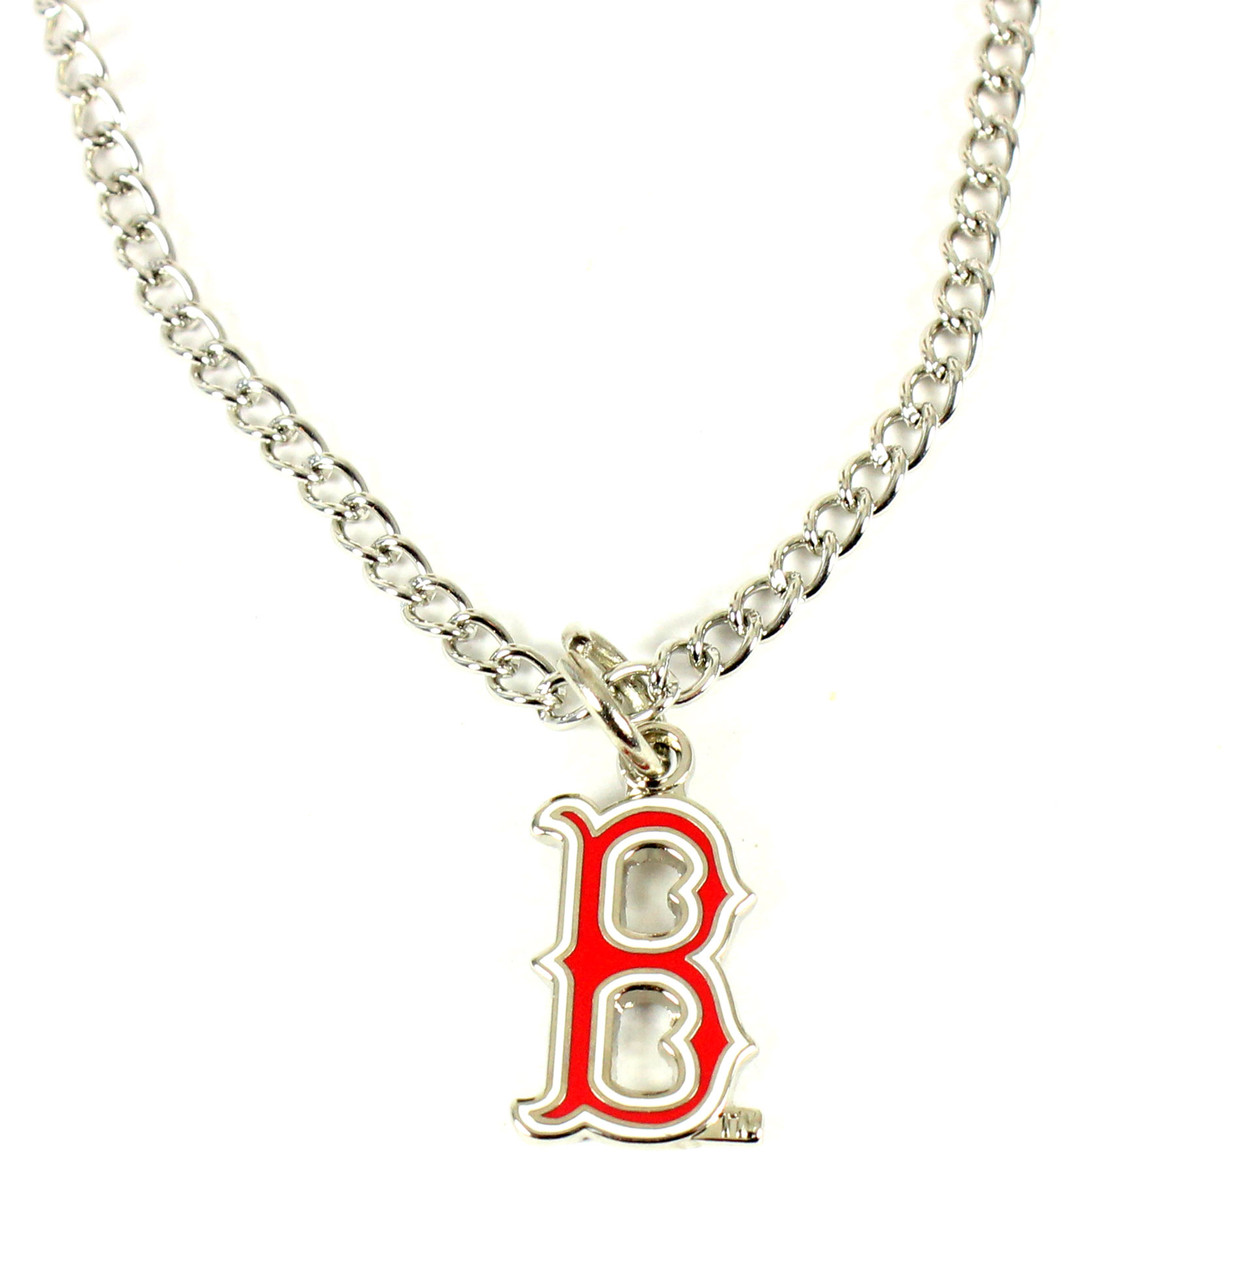 San Francisco 49ers 22 Chain Necklace with Metal Heart Logo Charm